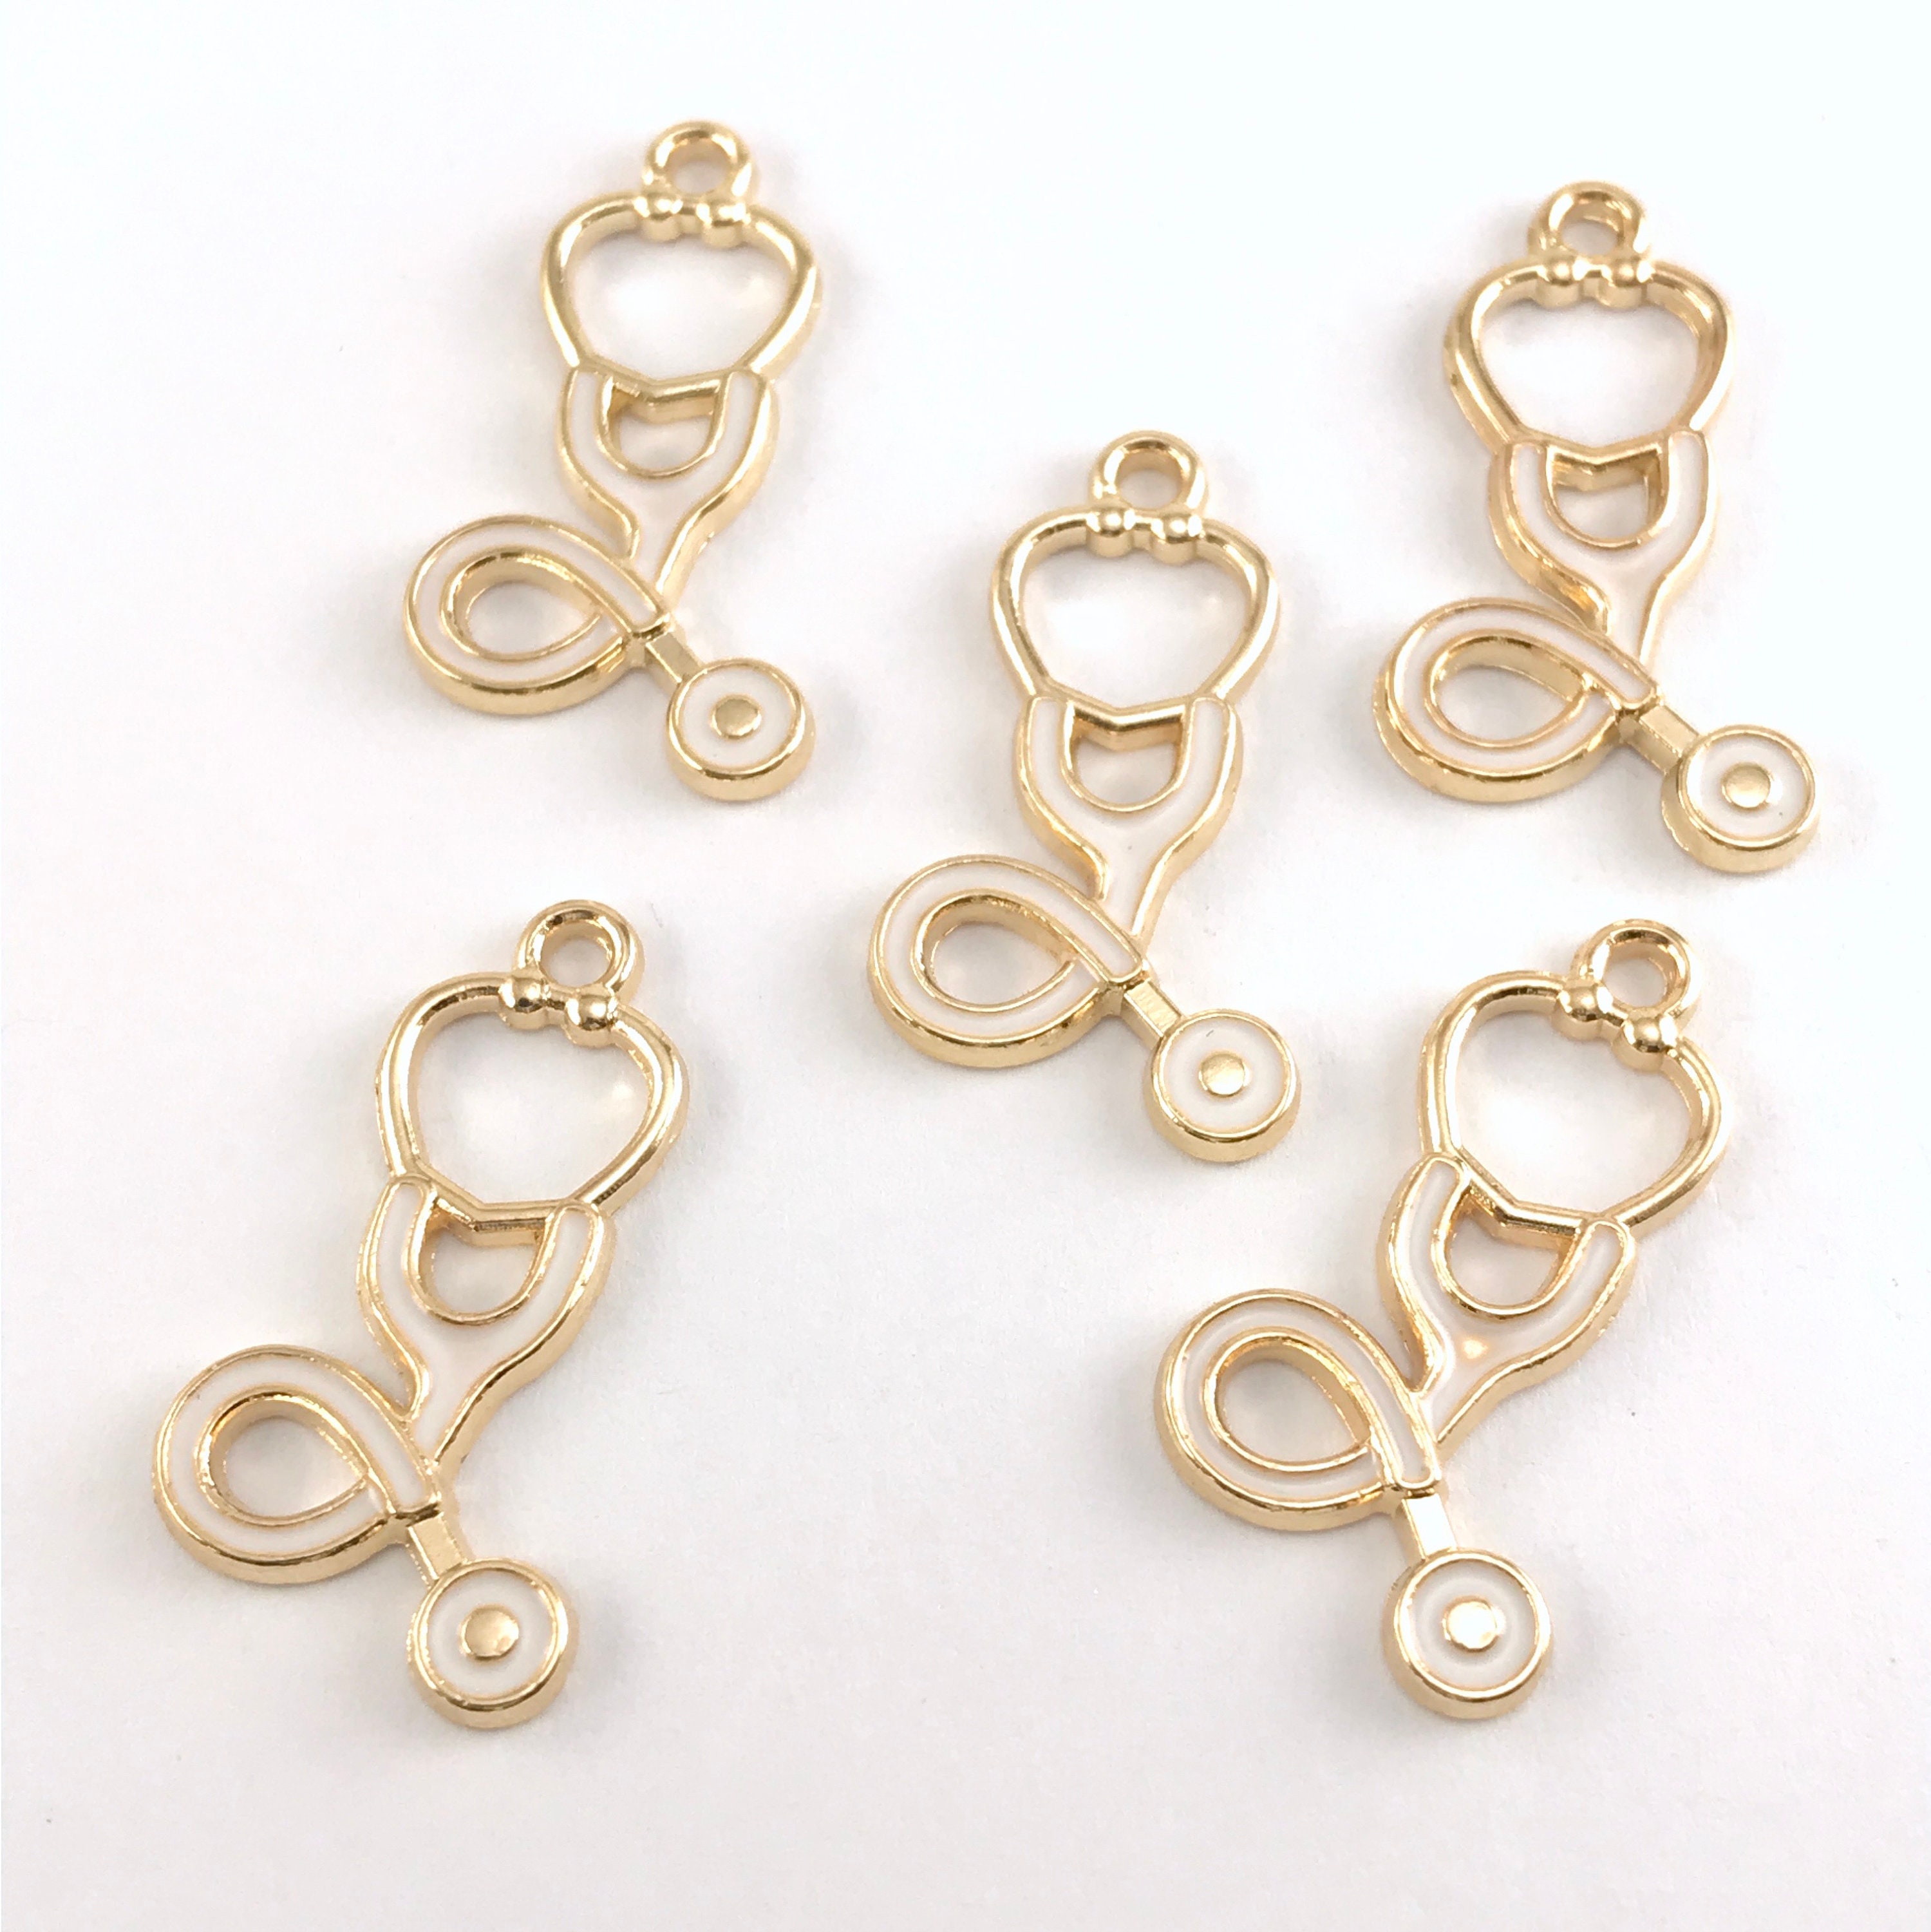 Gold Carabiner Screw Oval Pendant 20mm, Jewelry Making Supplies